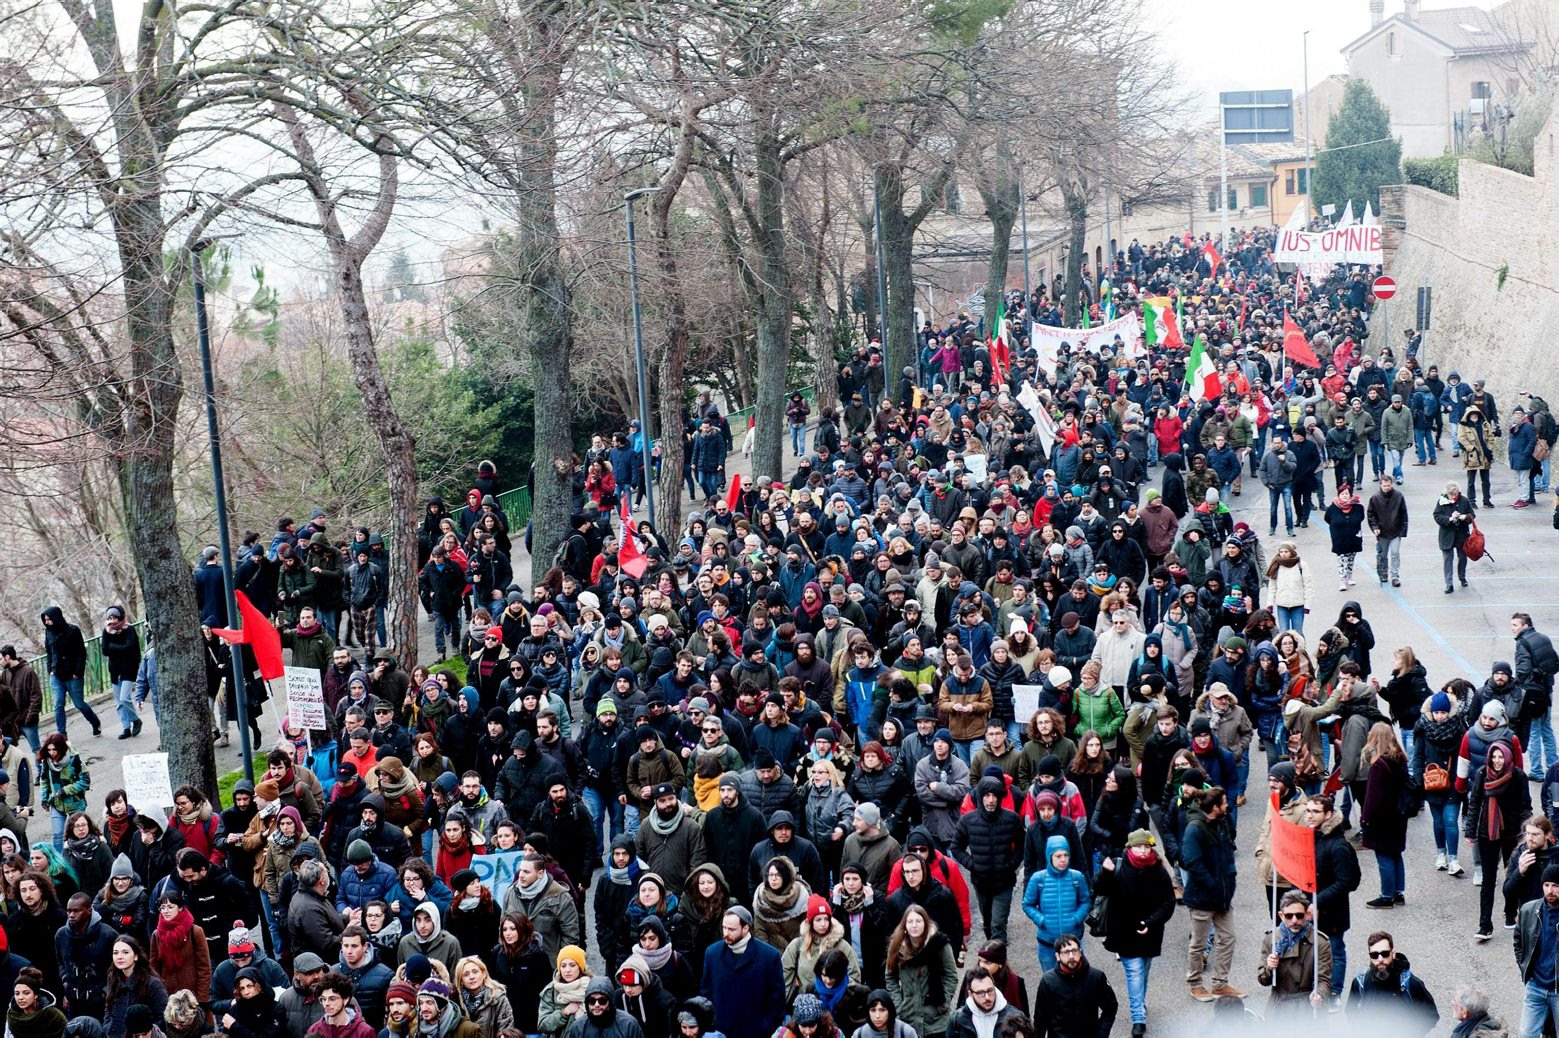 People take to the streets to partecipate in a anti-racism march following last SaturdayÄôs attacks in the Italian city of Macerata when six Africans were wounded in a two-hour drive-by shooting spree by a right-wing extremist, in Macerata, Italy, Saturday, Feb. 10, 2018. The Italian city where a man with a neo-Nazi background shot and wounded six Africans is bracing for the possibility of violence around an anti-fascist protest march. Schools in the city of Macerata were ordered closed on Saturday, while public transportation was halted for the afternoon protest. (Fabio Falcioni/ANSA via AP) Italy Shooting March